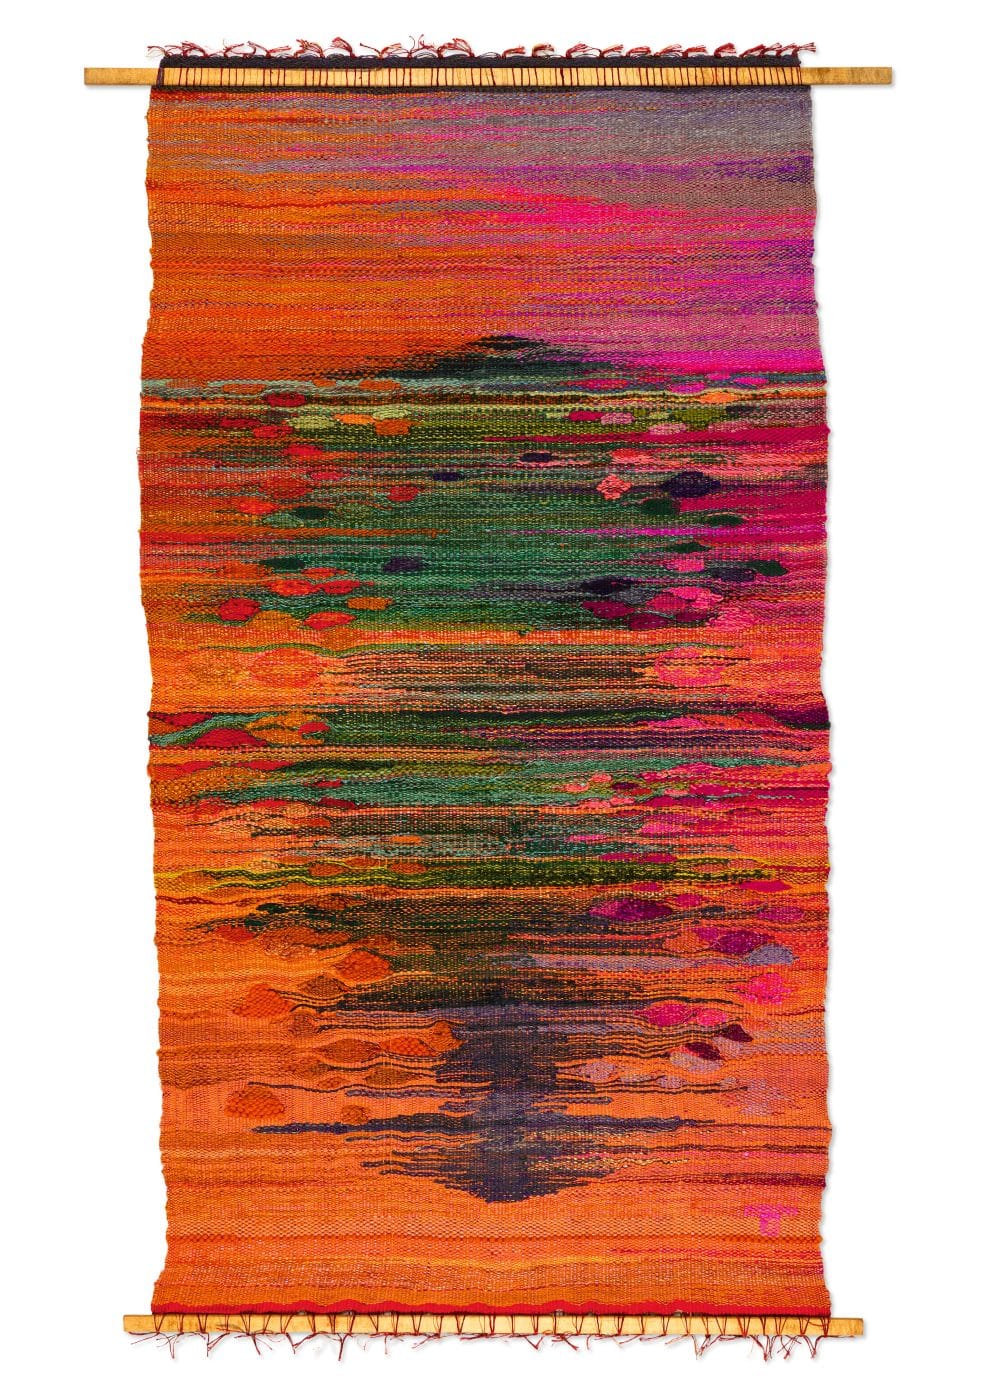 An orange and multicolor tapestry by American fiber artist Lenore Tawney